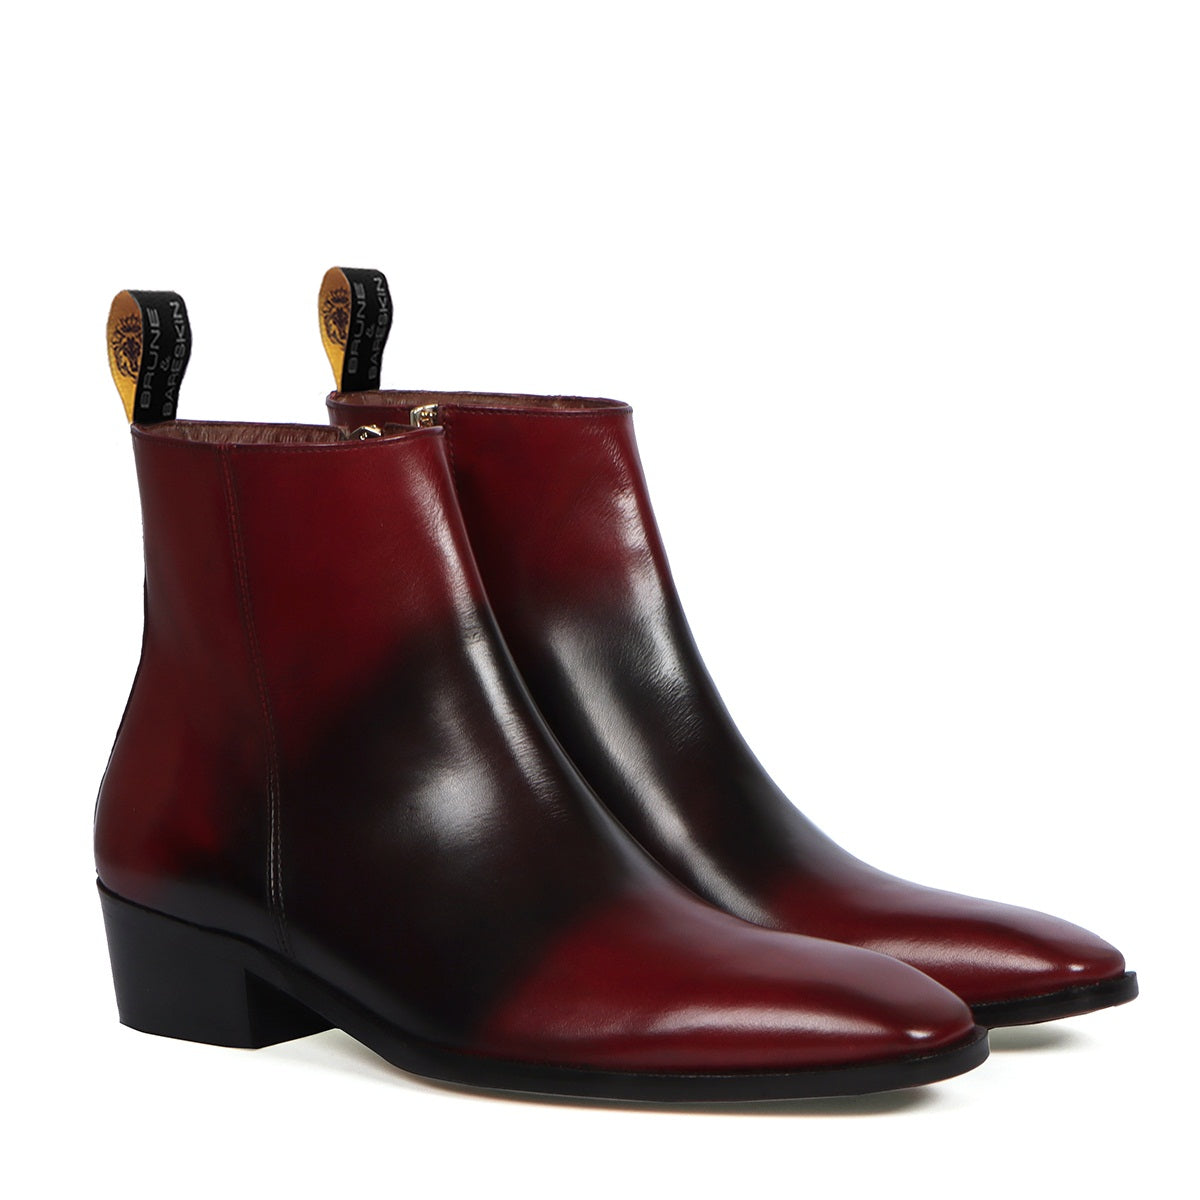 Men Formal Boot with High Ankle Stitched in Wine Black Leather